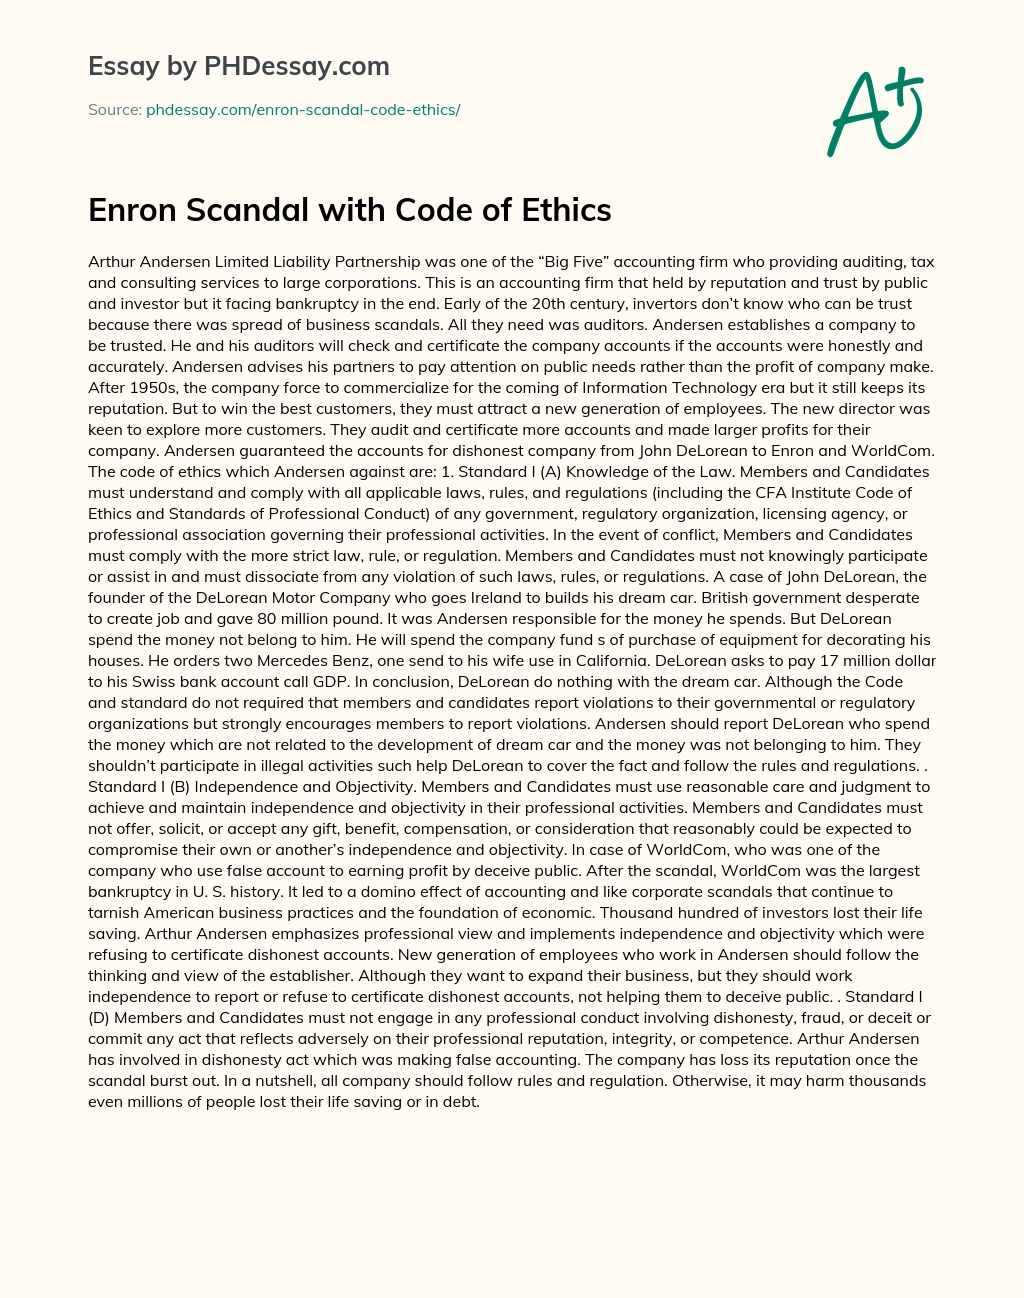 Enron Scandal with Code of Ethics essay